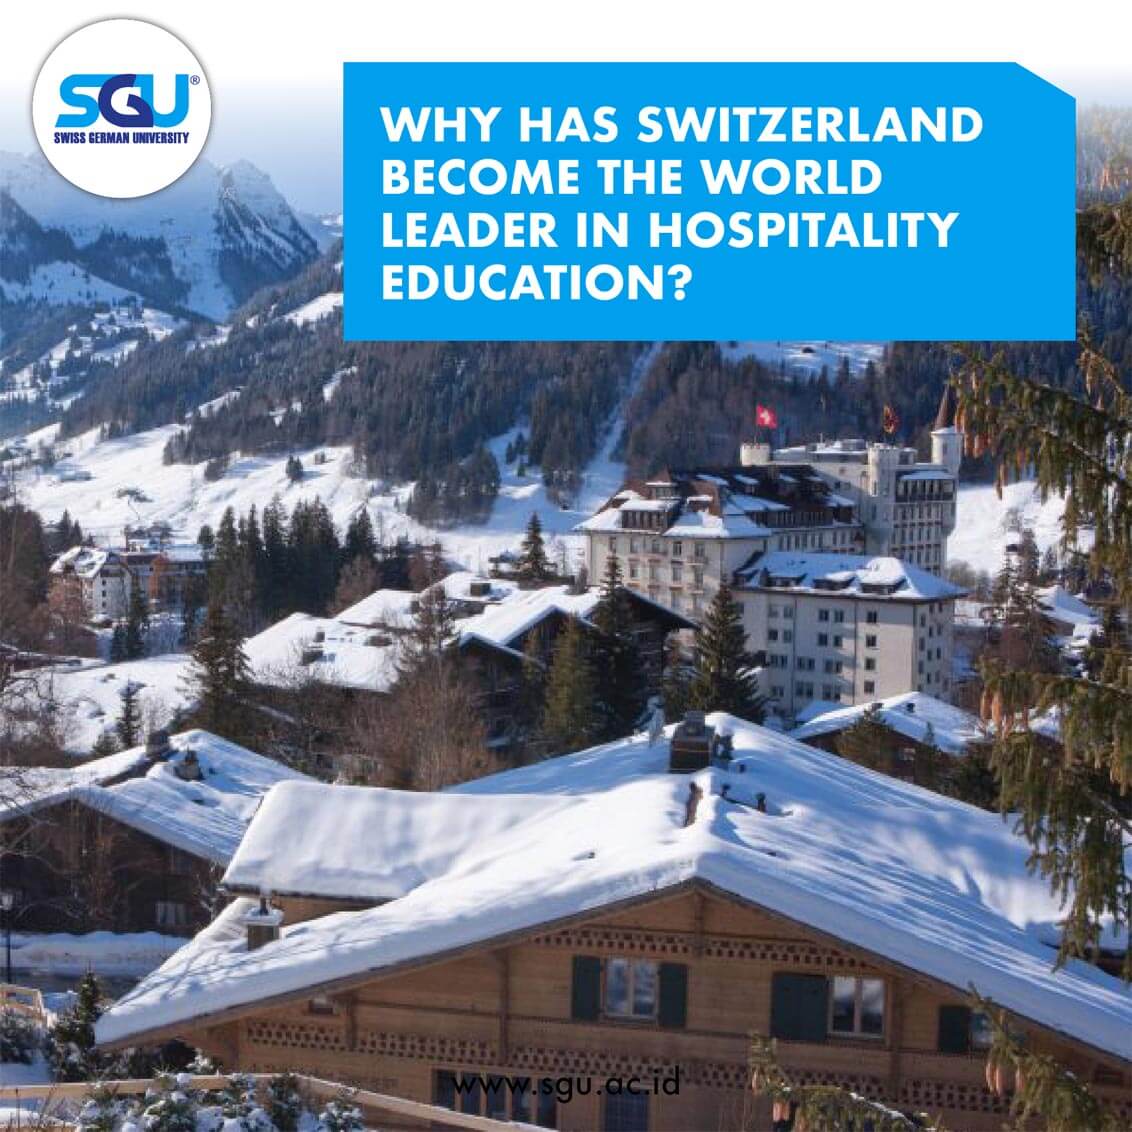 Why has Switzerland become the world leader in hospitality education?